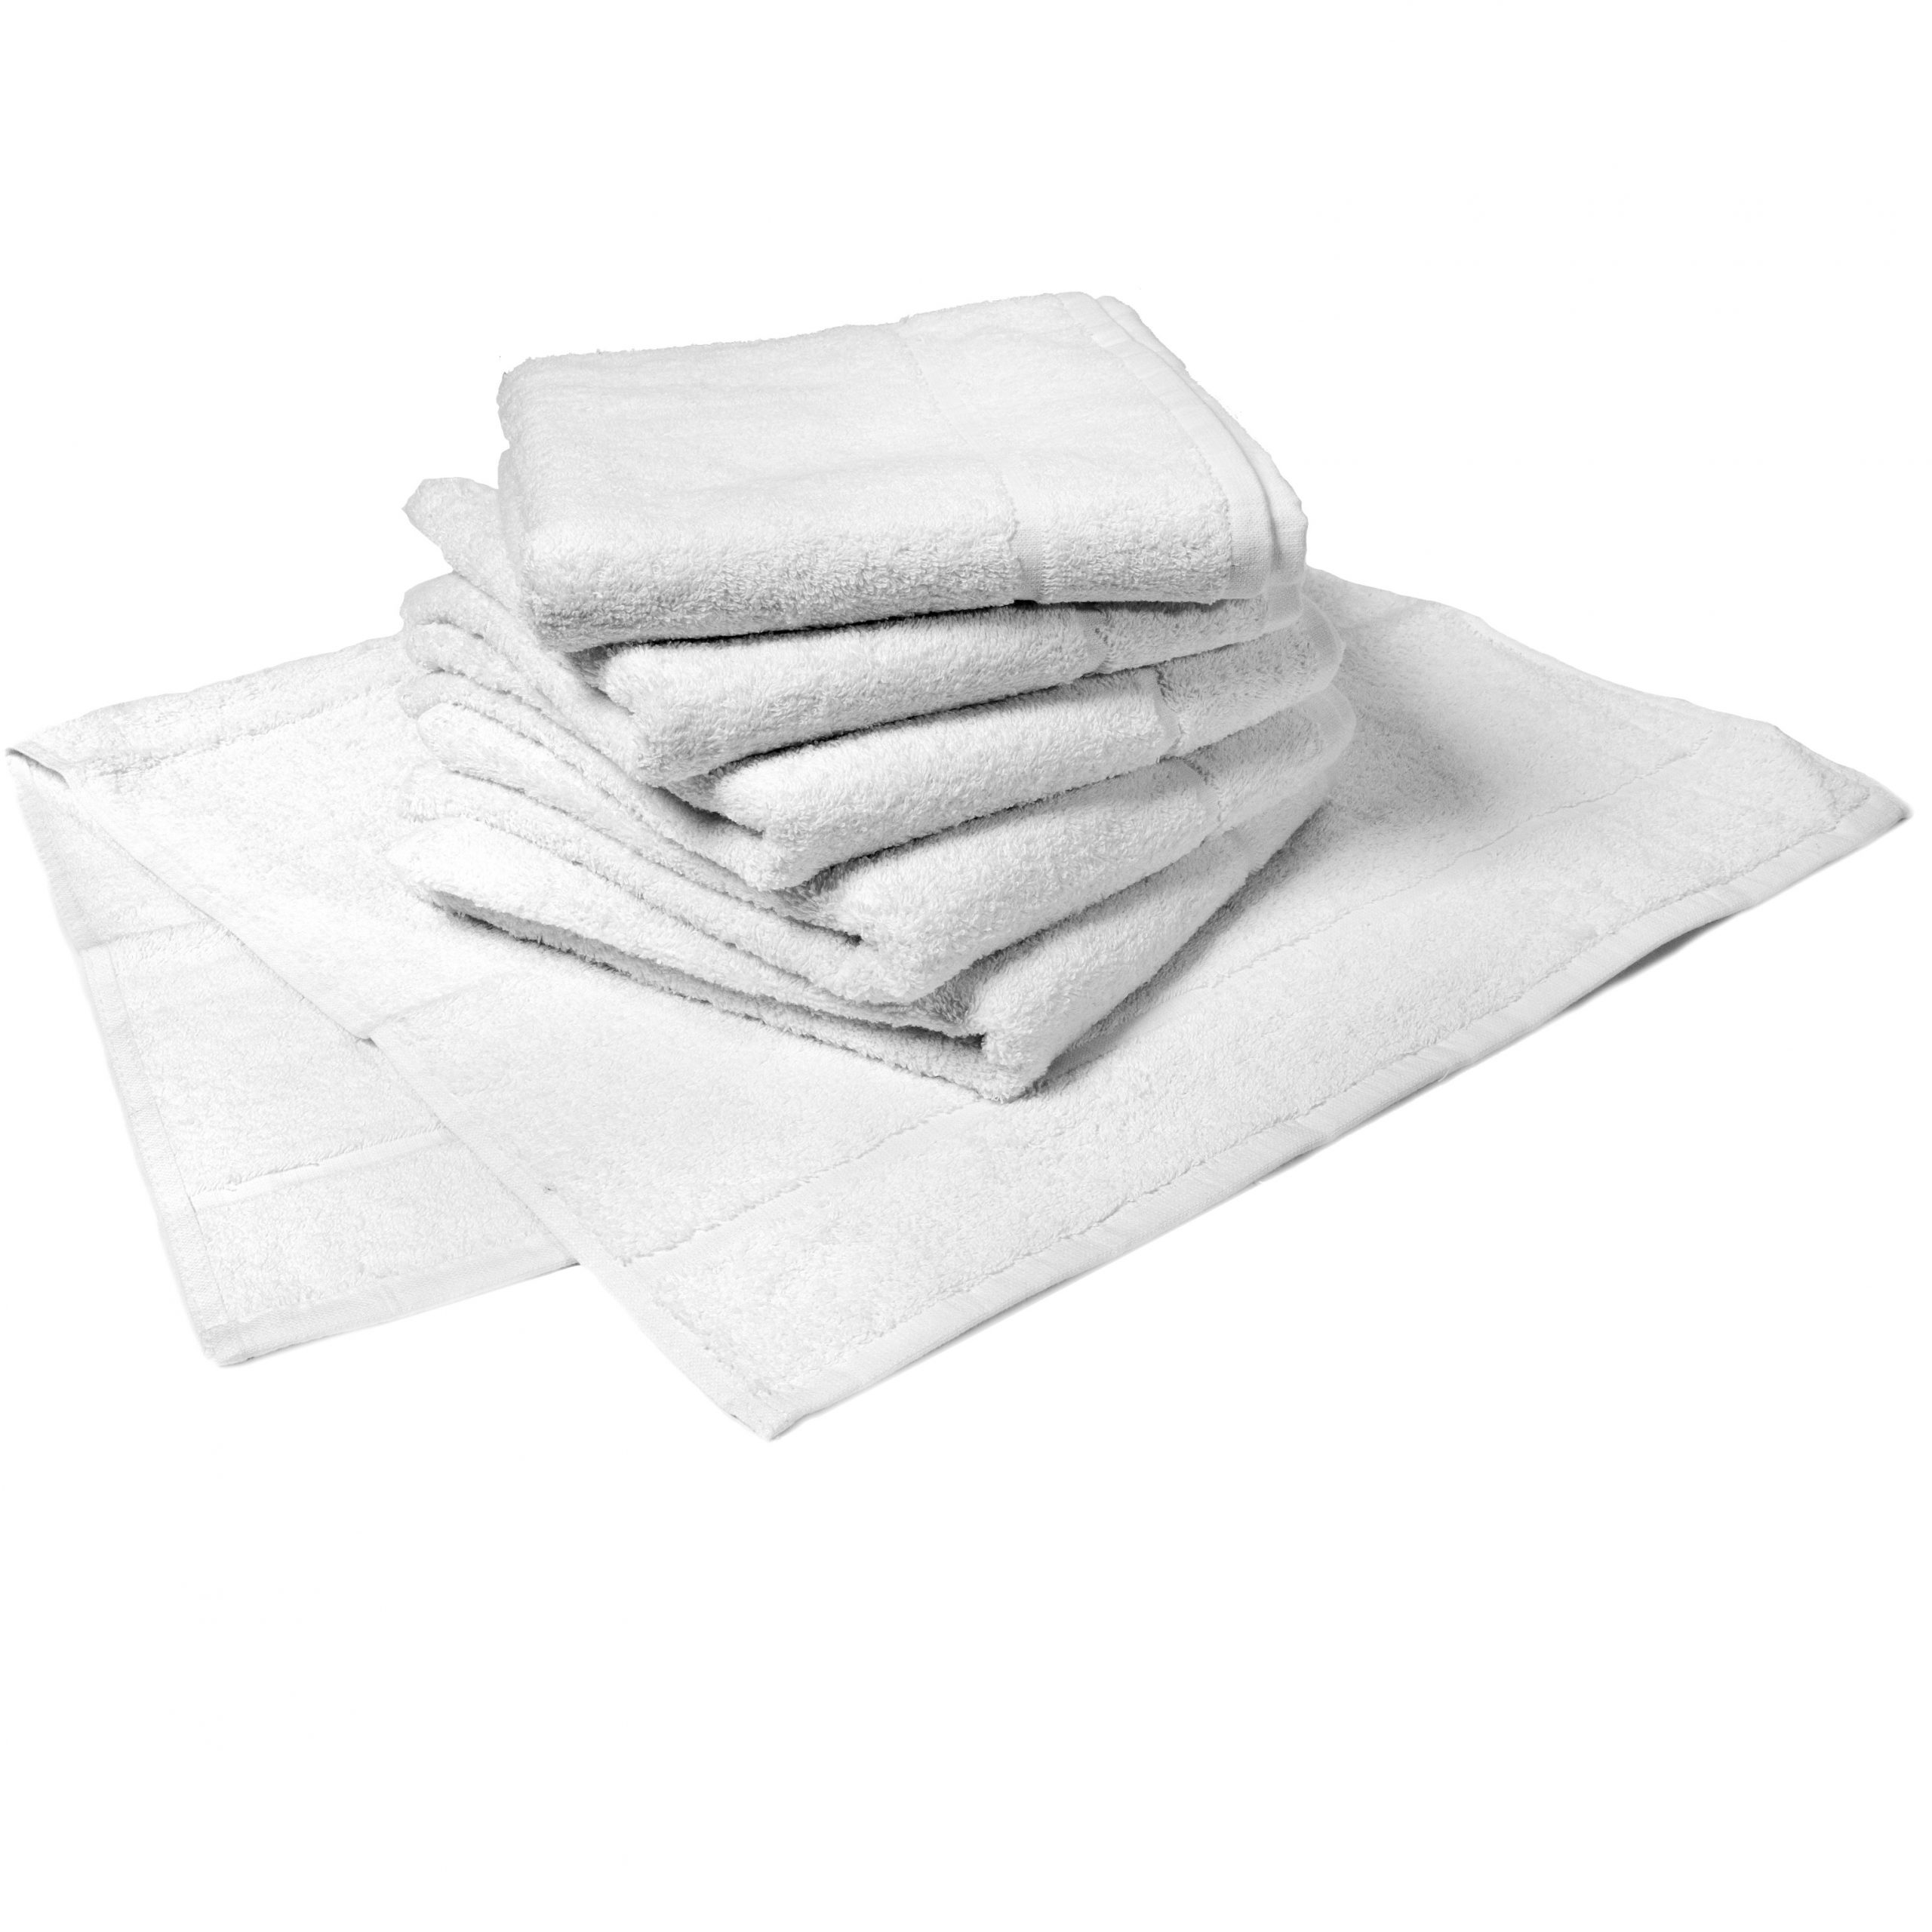 HAND-TOWEL-WHITE-FURNCARE-16-10-197924-1-scaled